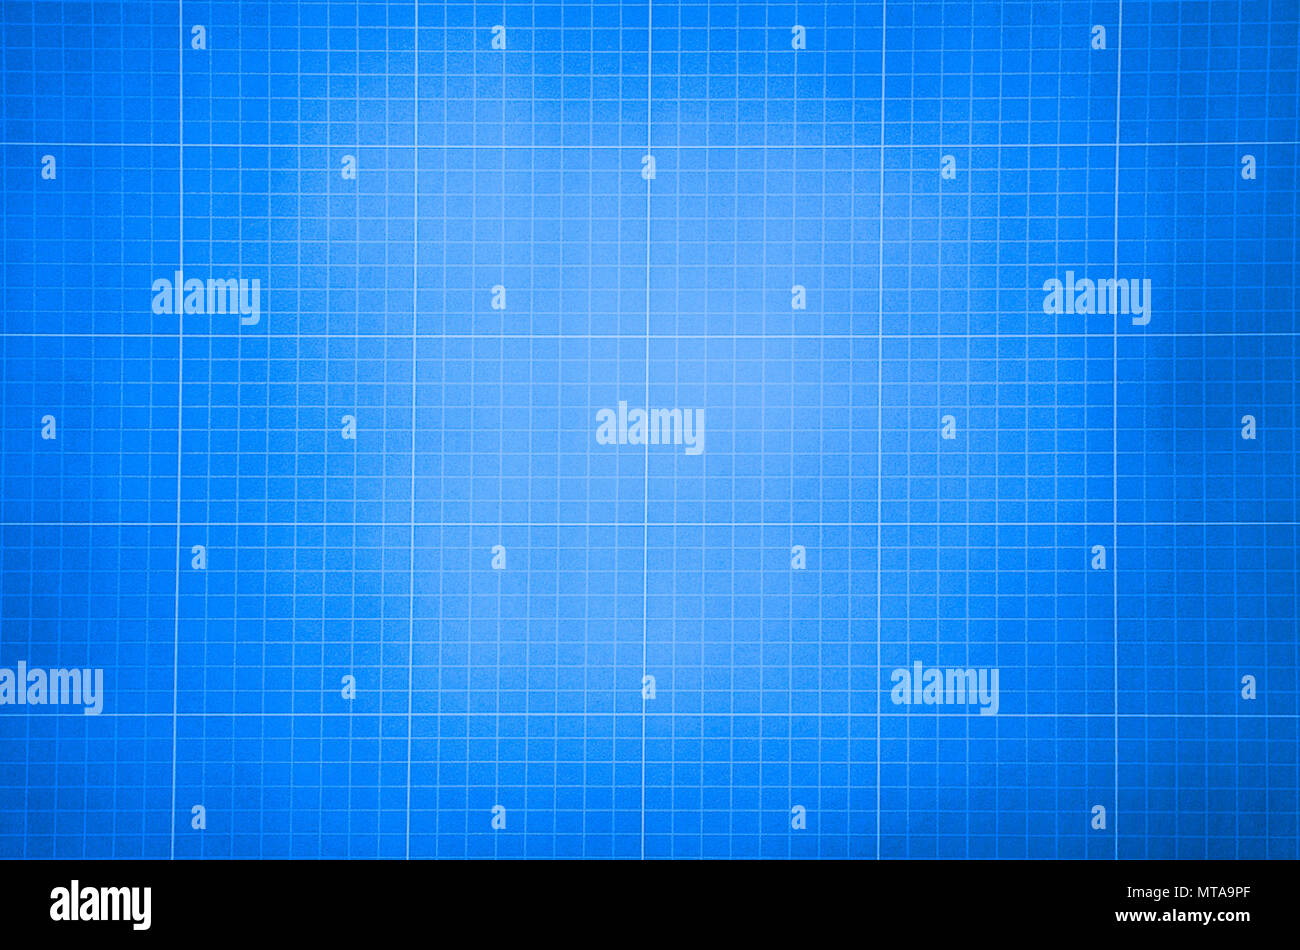 Millimeter engineering paper. Blue graph paper background. Graph paper for building and architectural drawings Stock Photo